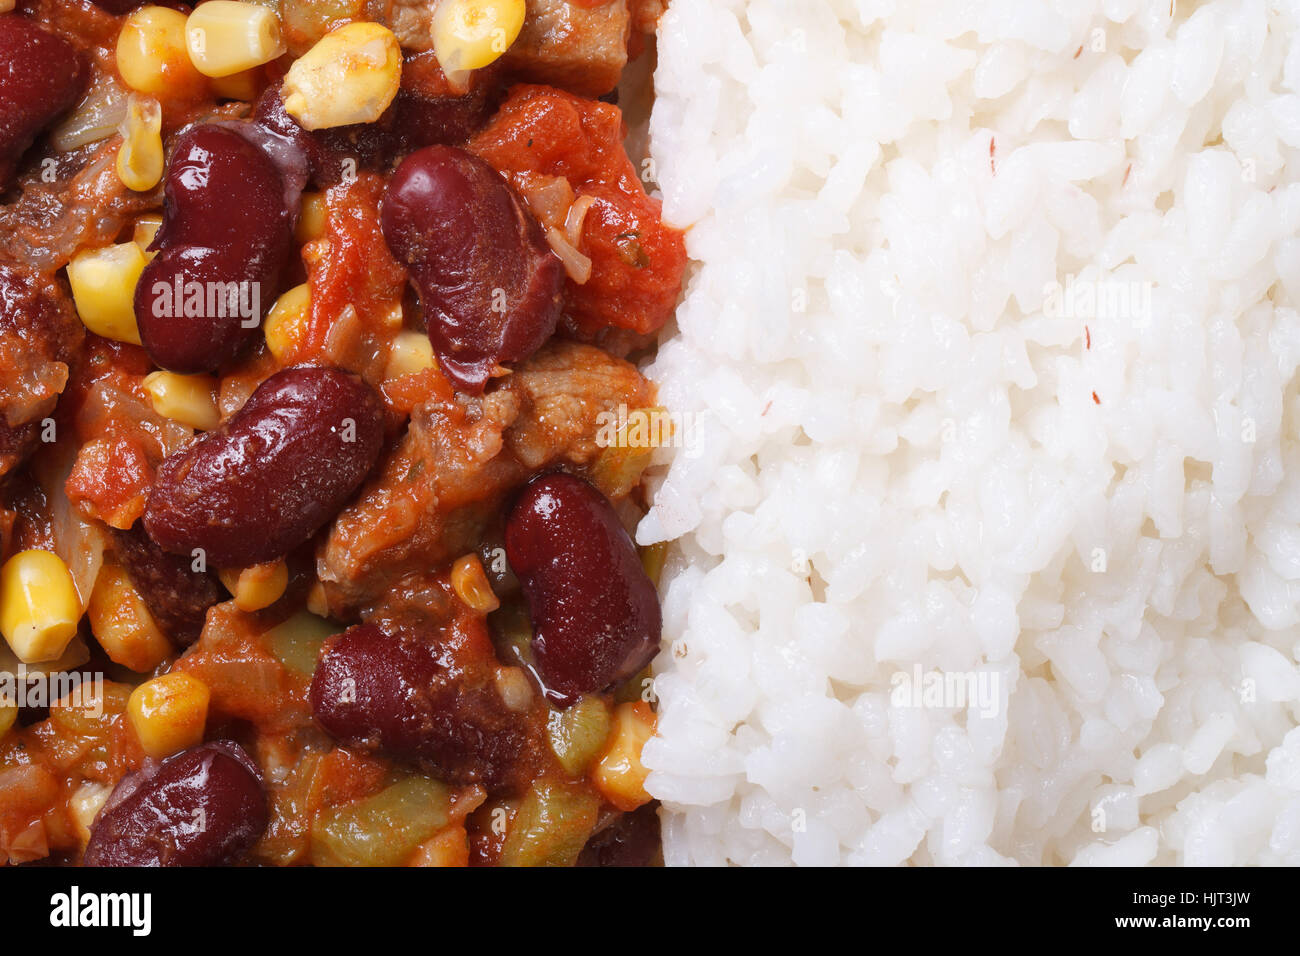 Mexican food is chili con carne and rice macro horizontal top view Stock Photo